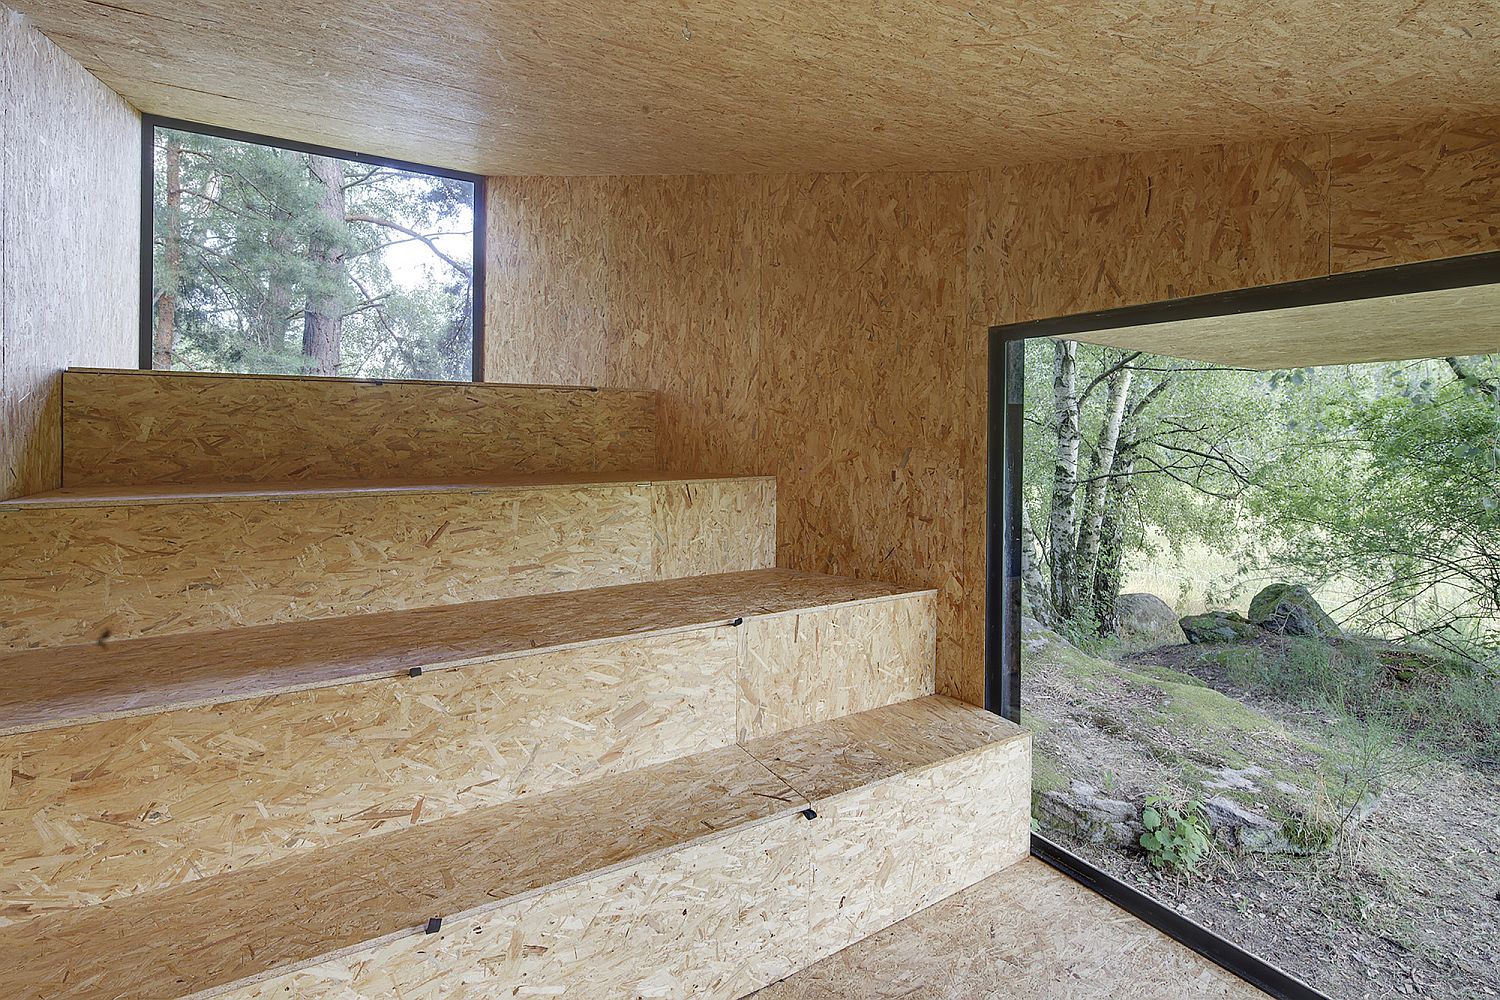 Steps-inside-the-tiny-cabin-with-storage-inside